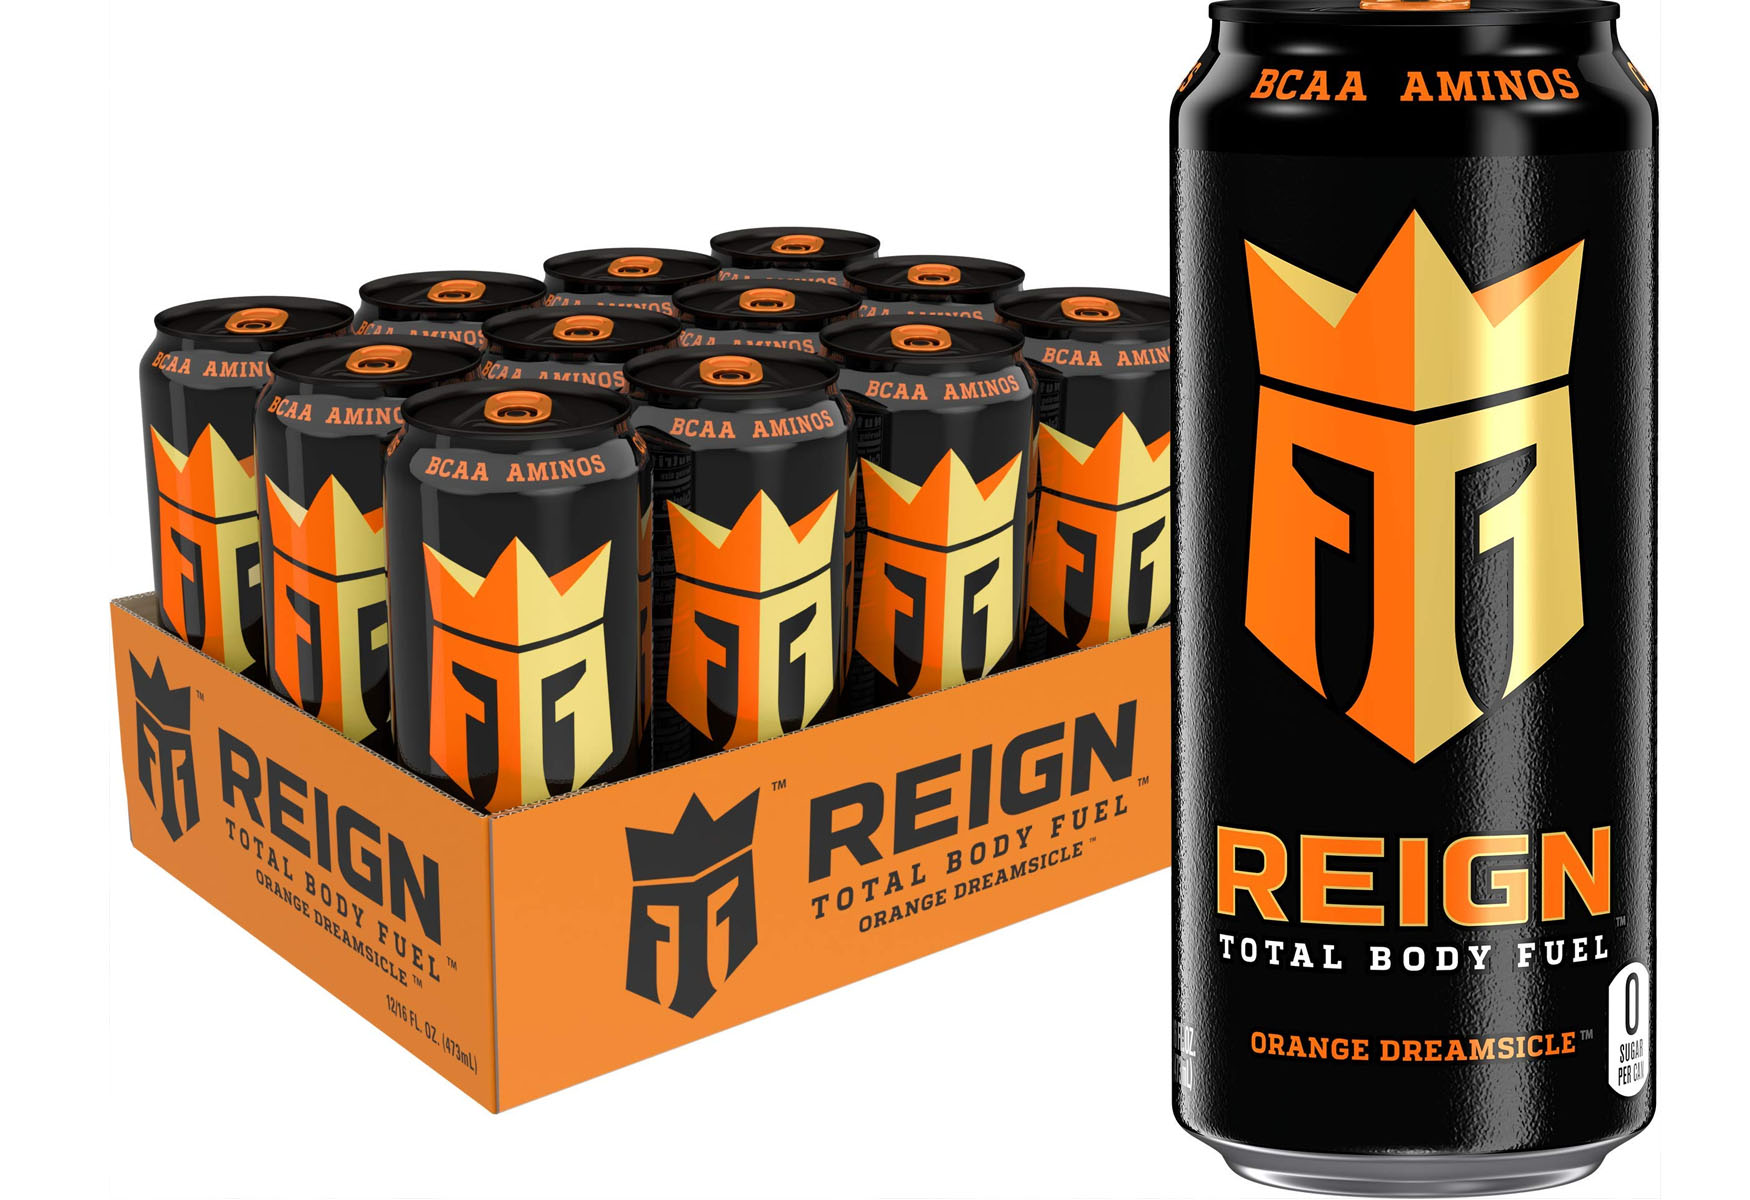 11-reign-orange-dreamsicle-nutrition-facts